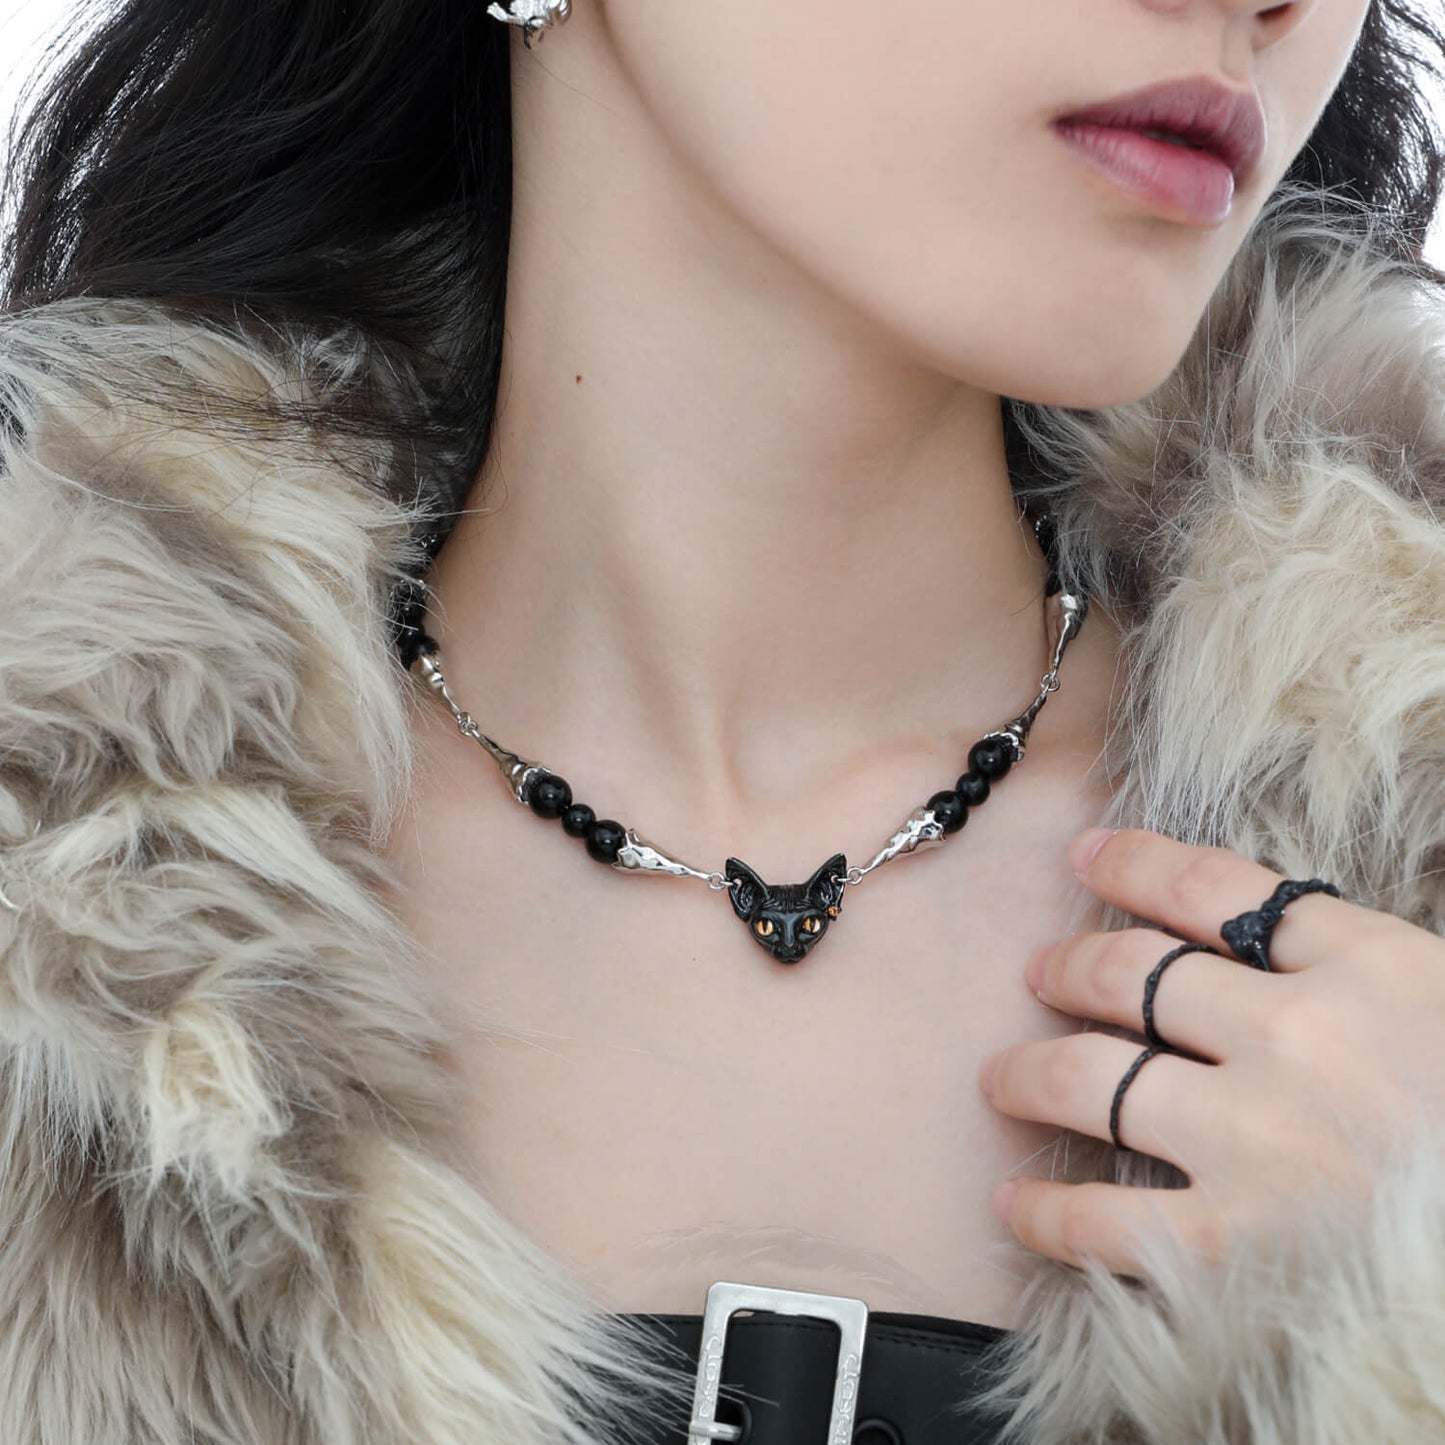 Y2K Dark Cat Clavicle Chain Necklace  Buy at Khanie